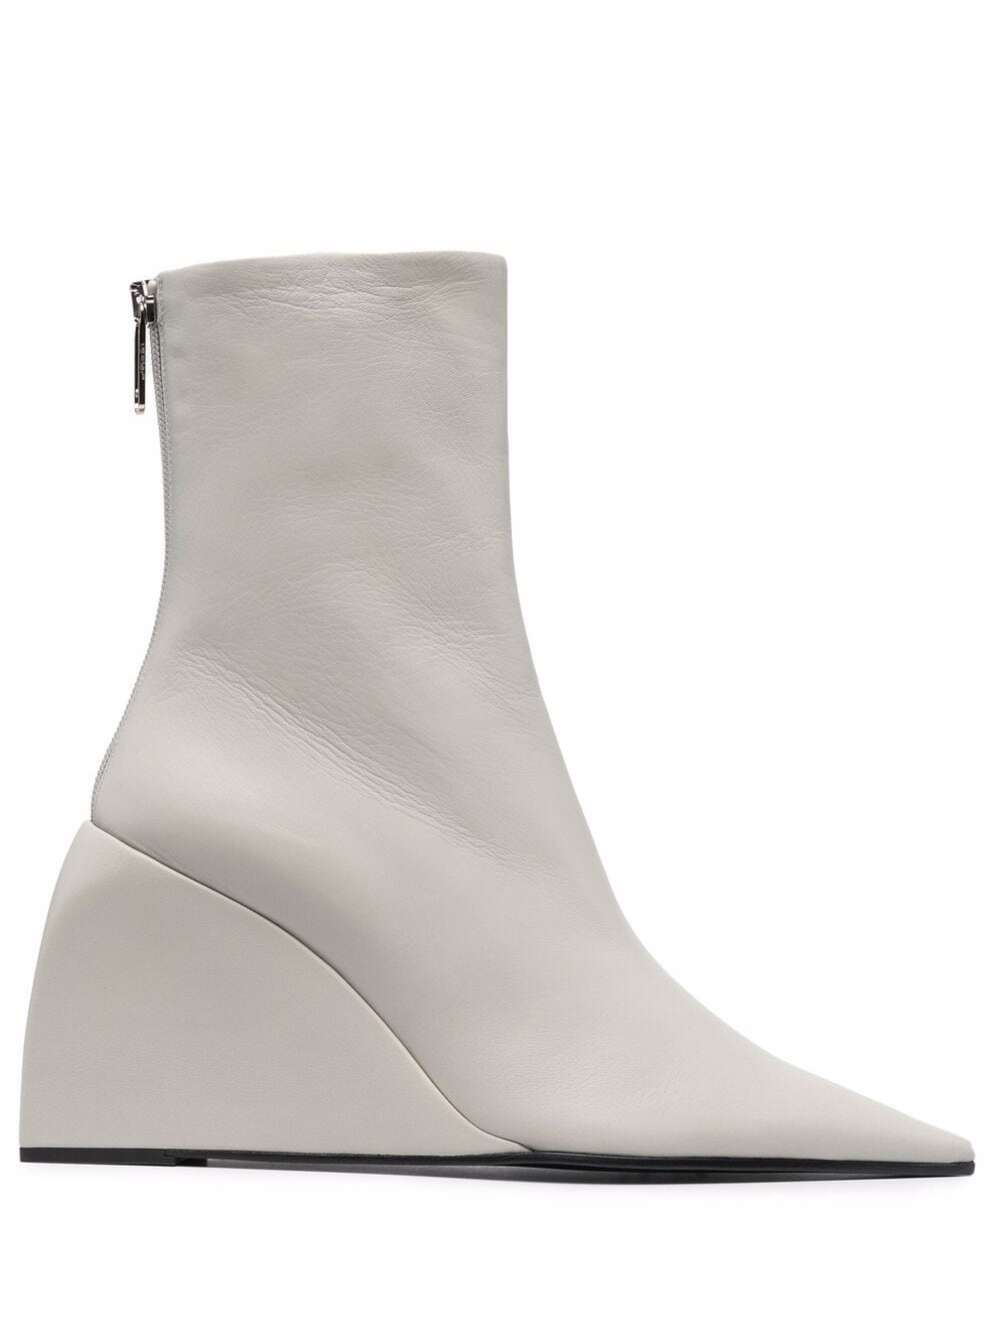 Off-White Wedge Leather Boots